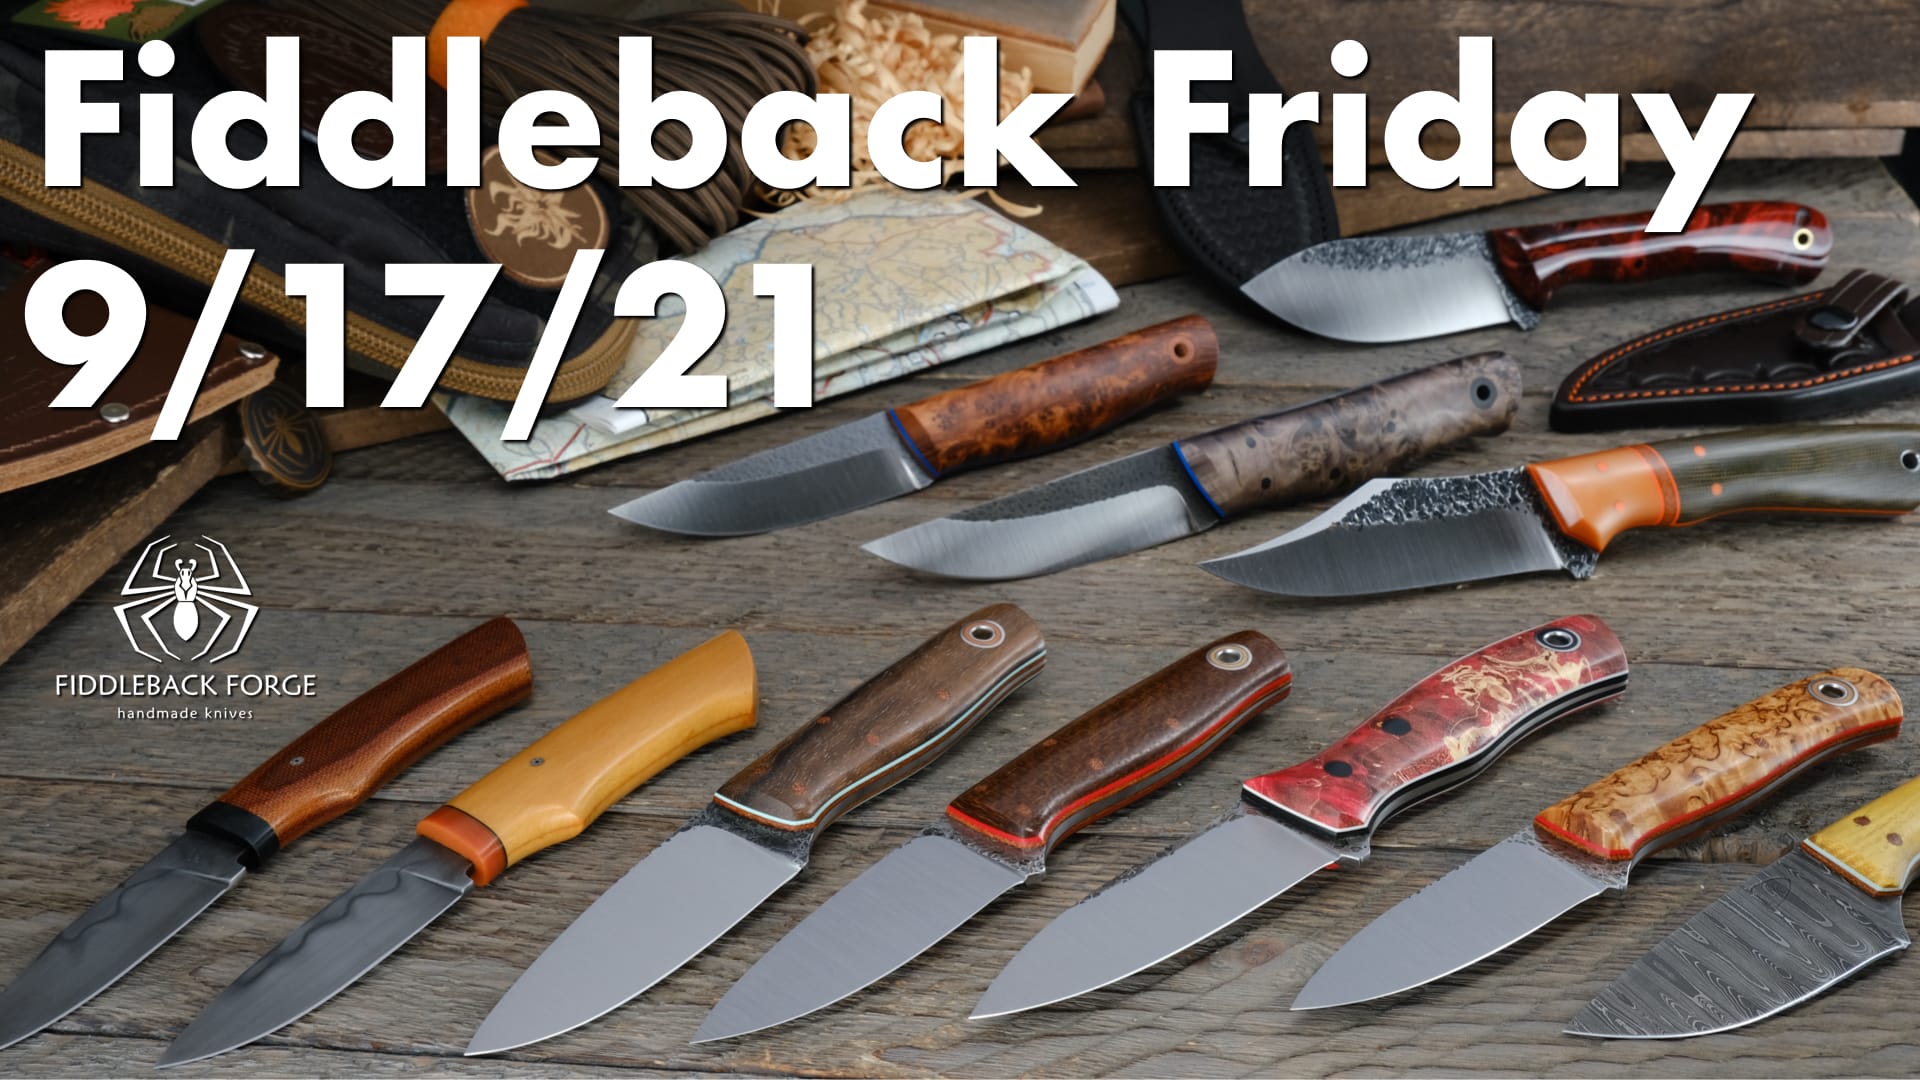 Fiddleback Friday 9/17/21 - Video Preview